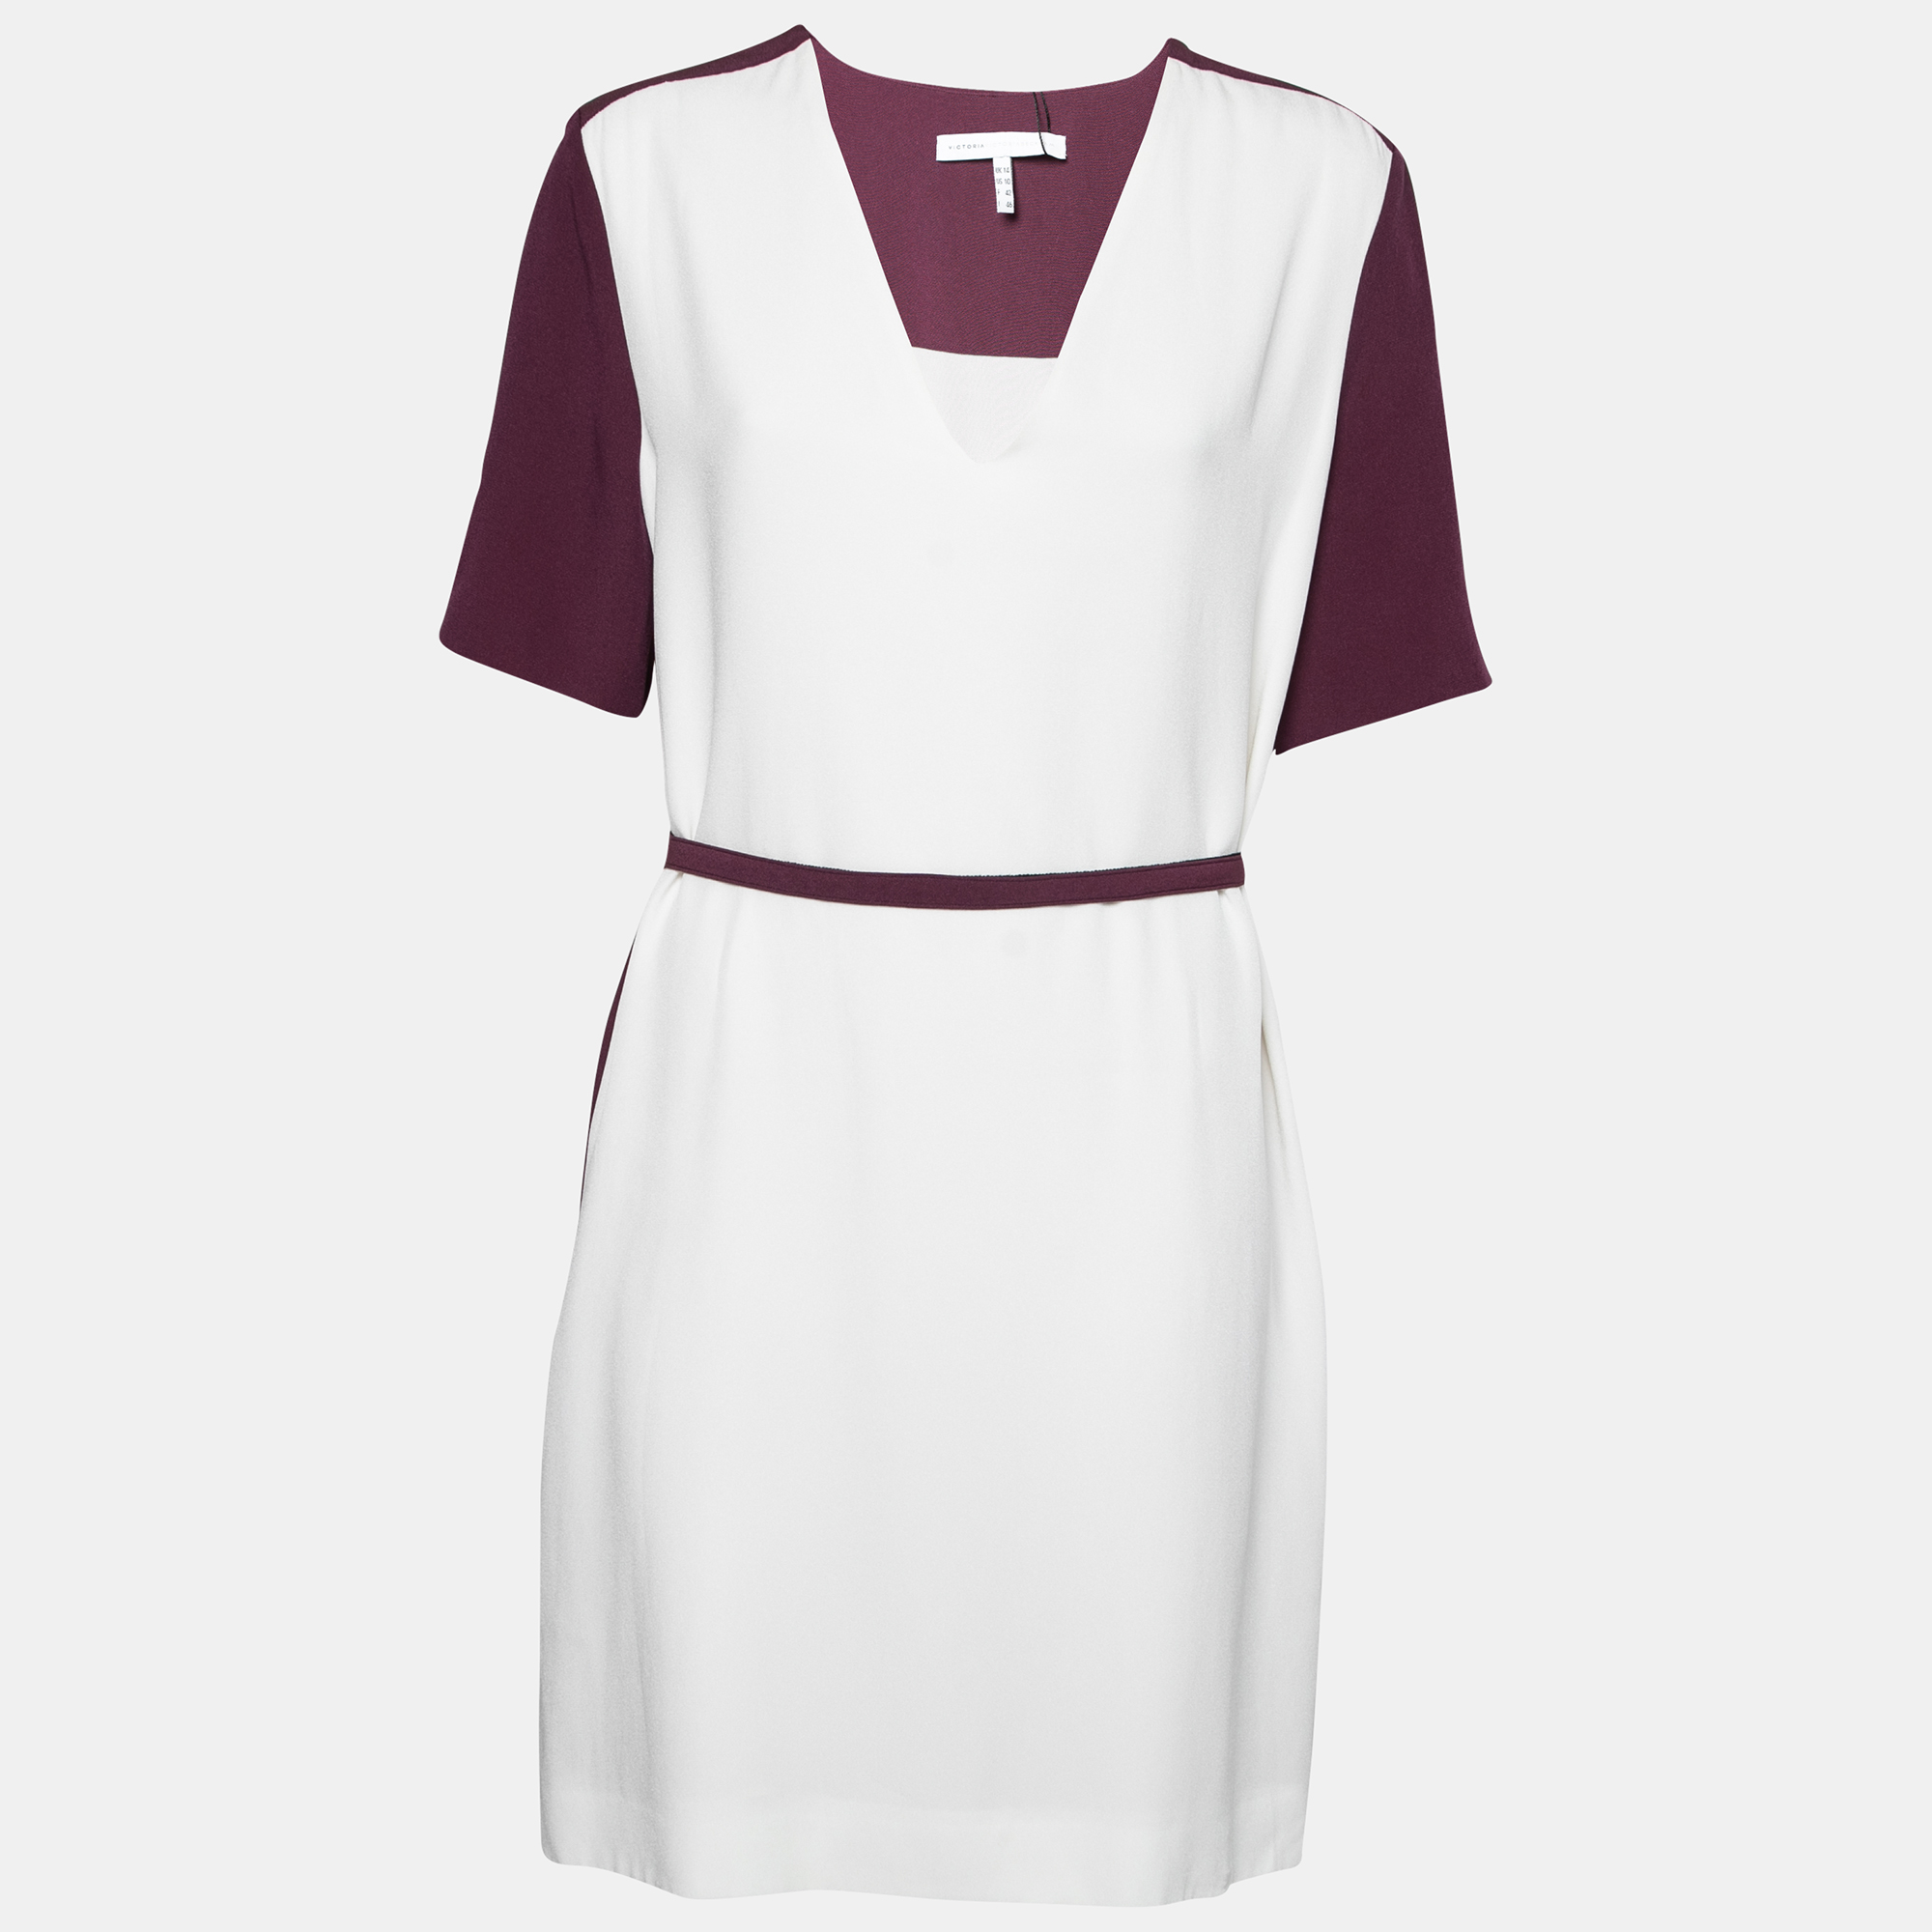 

Victoria Victoria Beckham Purple and White Belted Shift Dress